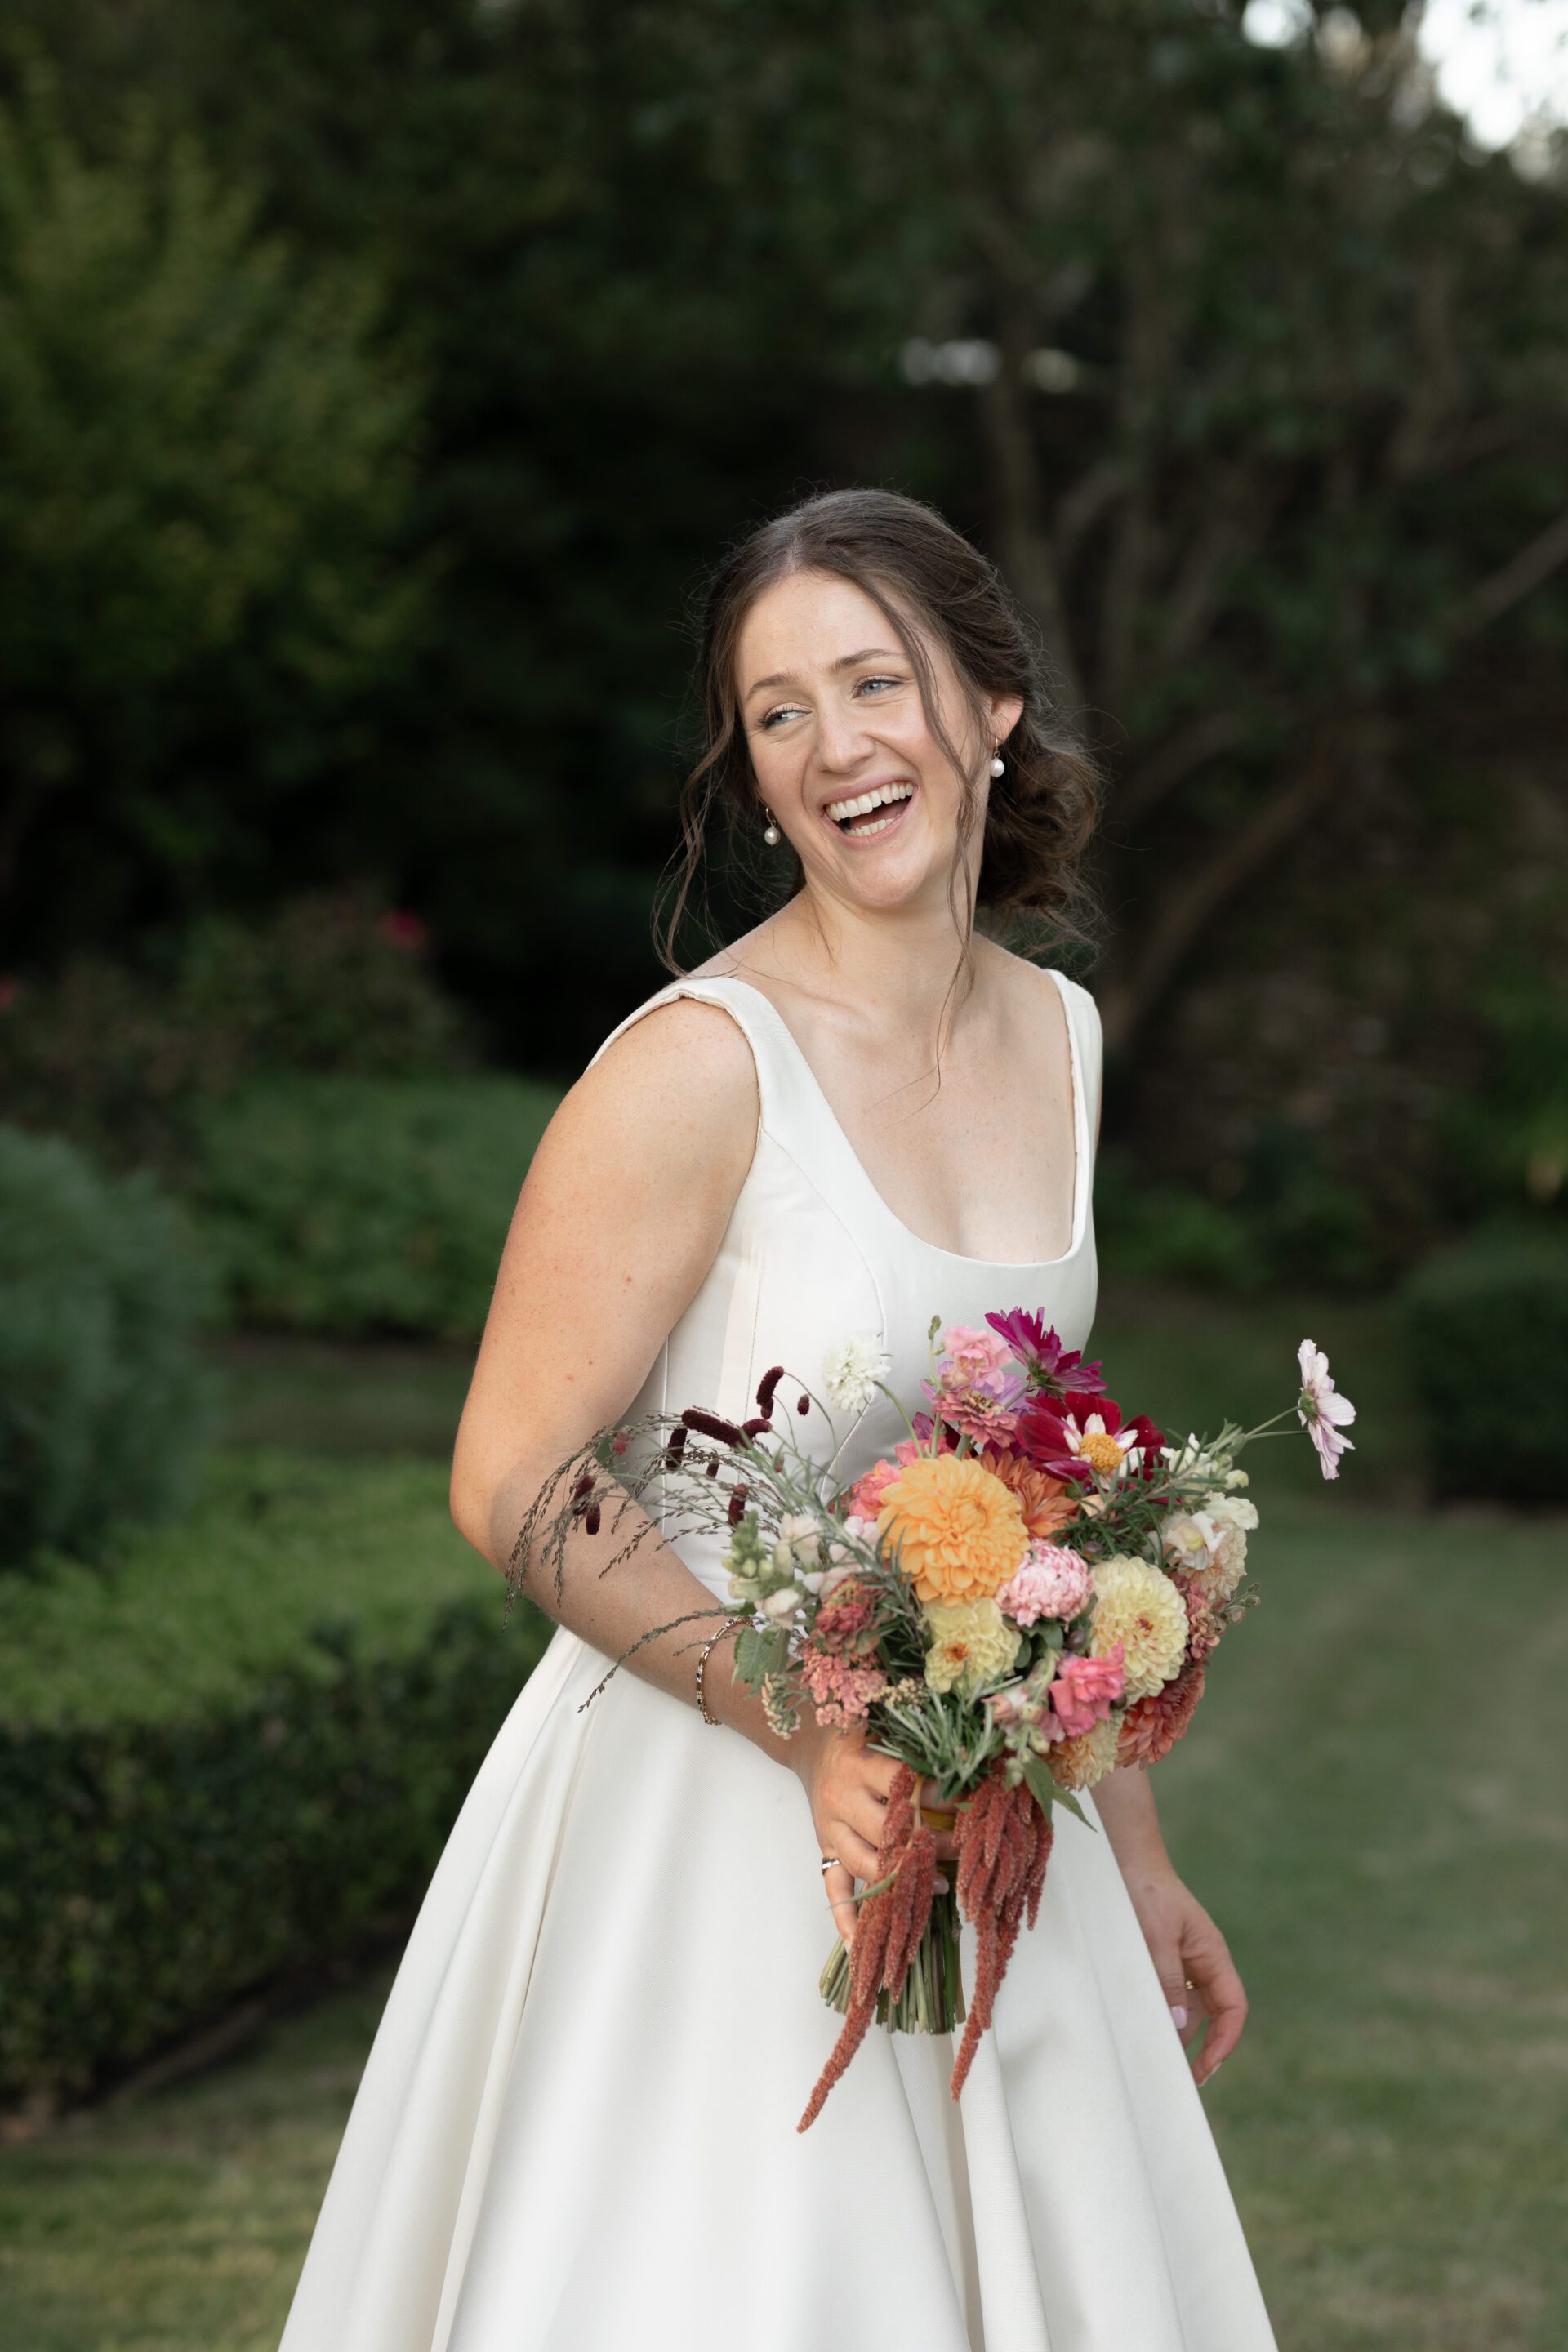 A bridal portrait taken outdoors at a Somerset marquee wedding reception